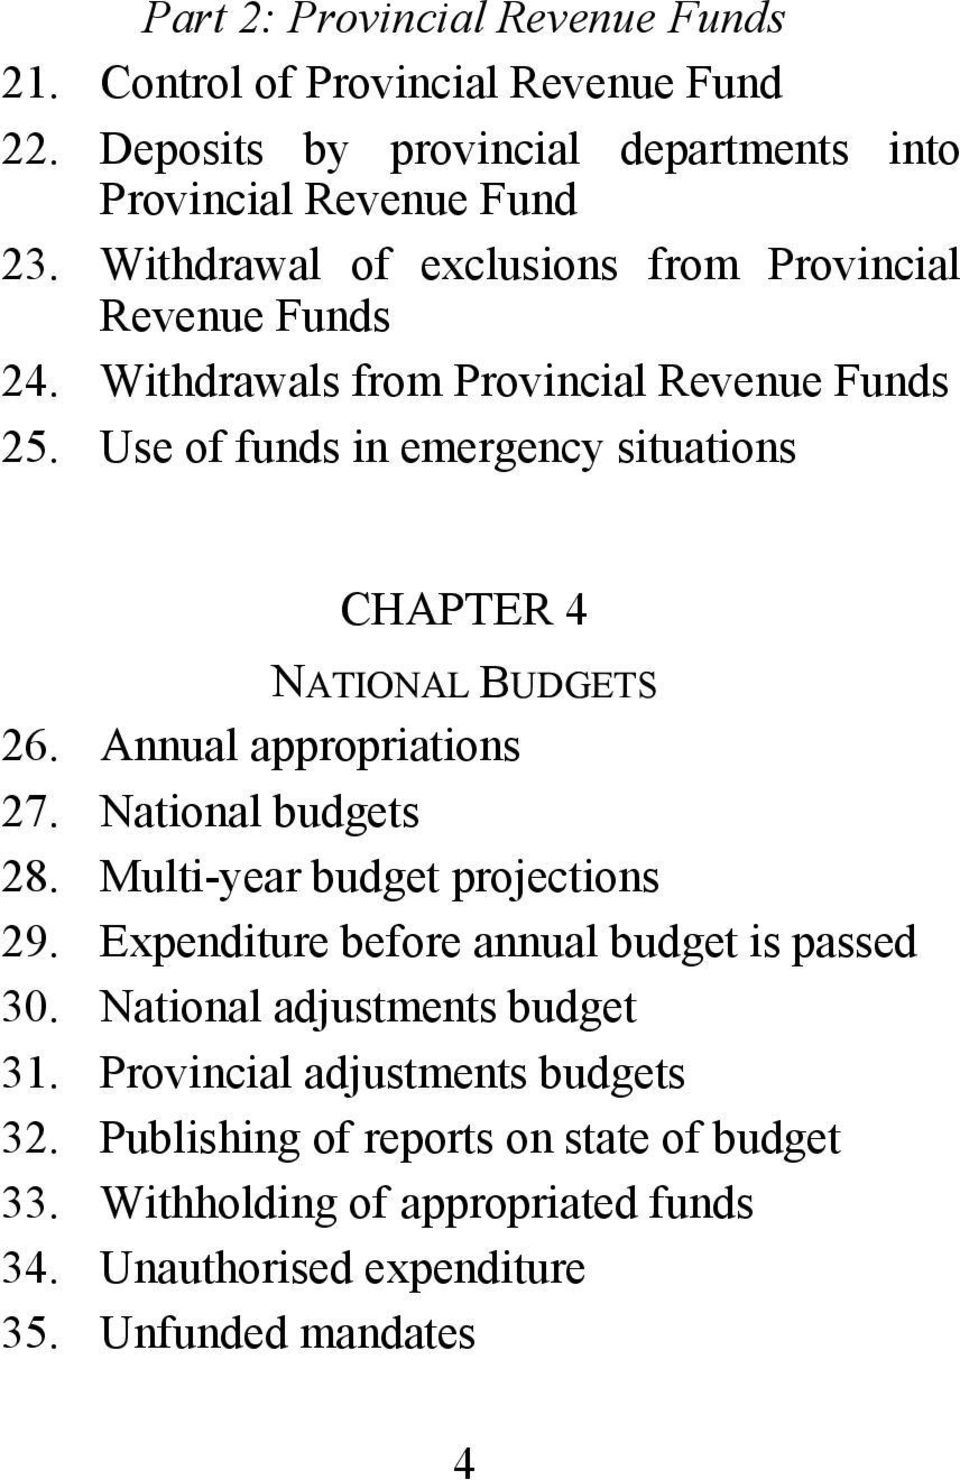 Use of funds in emergency situations CHAPTER 4 NATIONAL BUDGETS 26. Annual appropriations 27. National budgets 28. Multi-year budget projections 29.